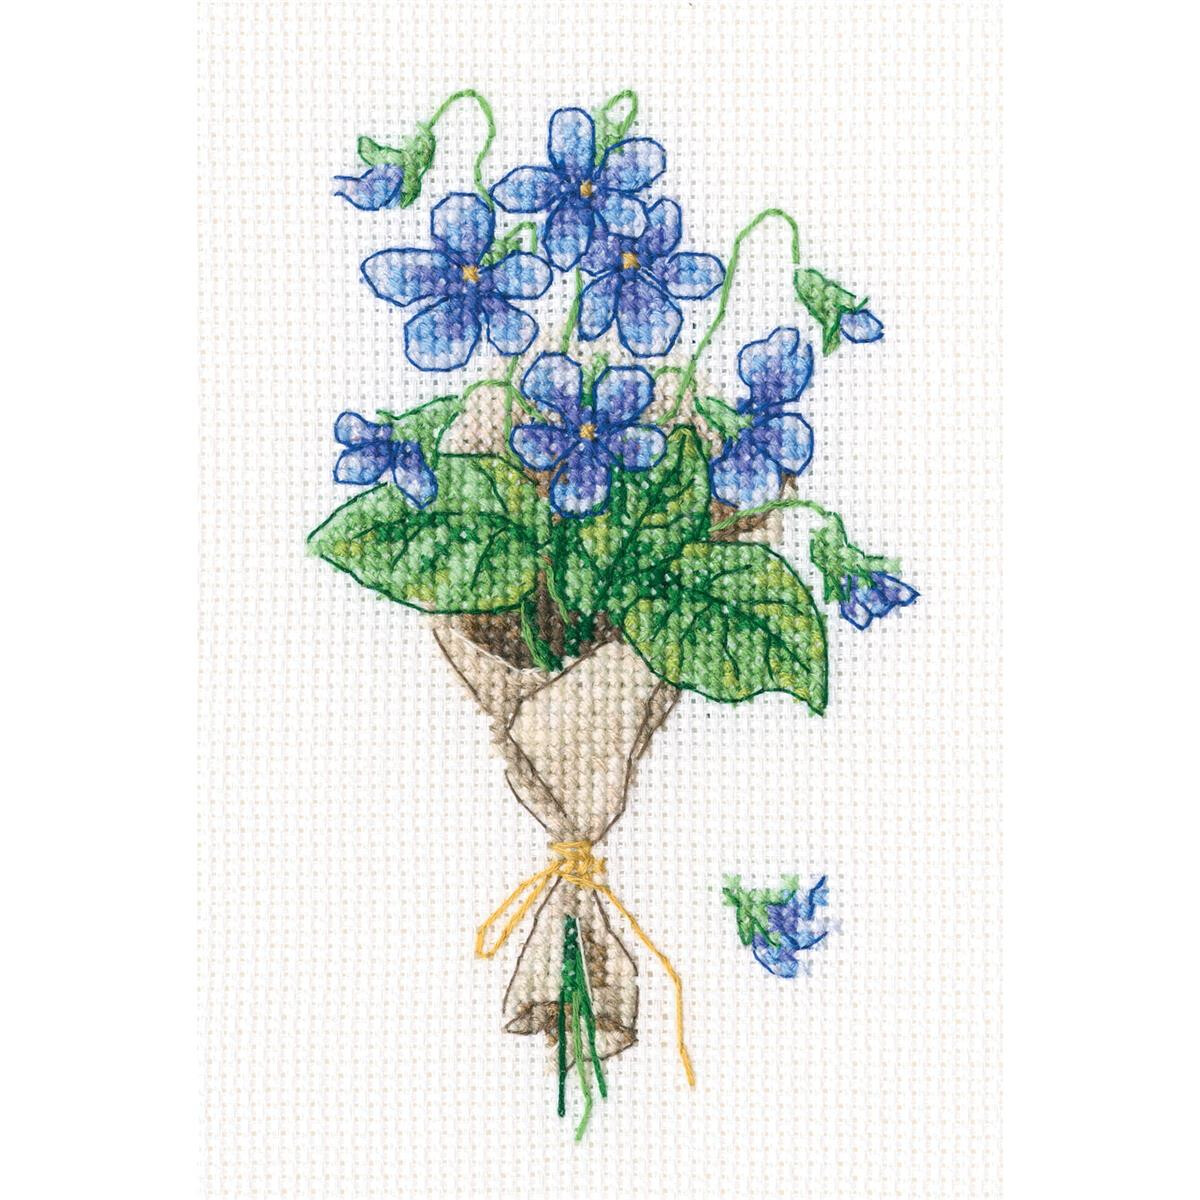 RTO counted Cross Stitch Kit "Forest violets"...